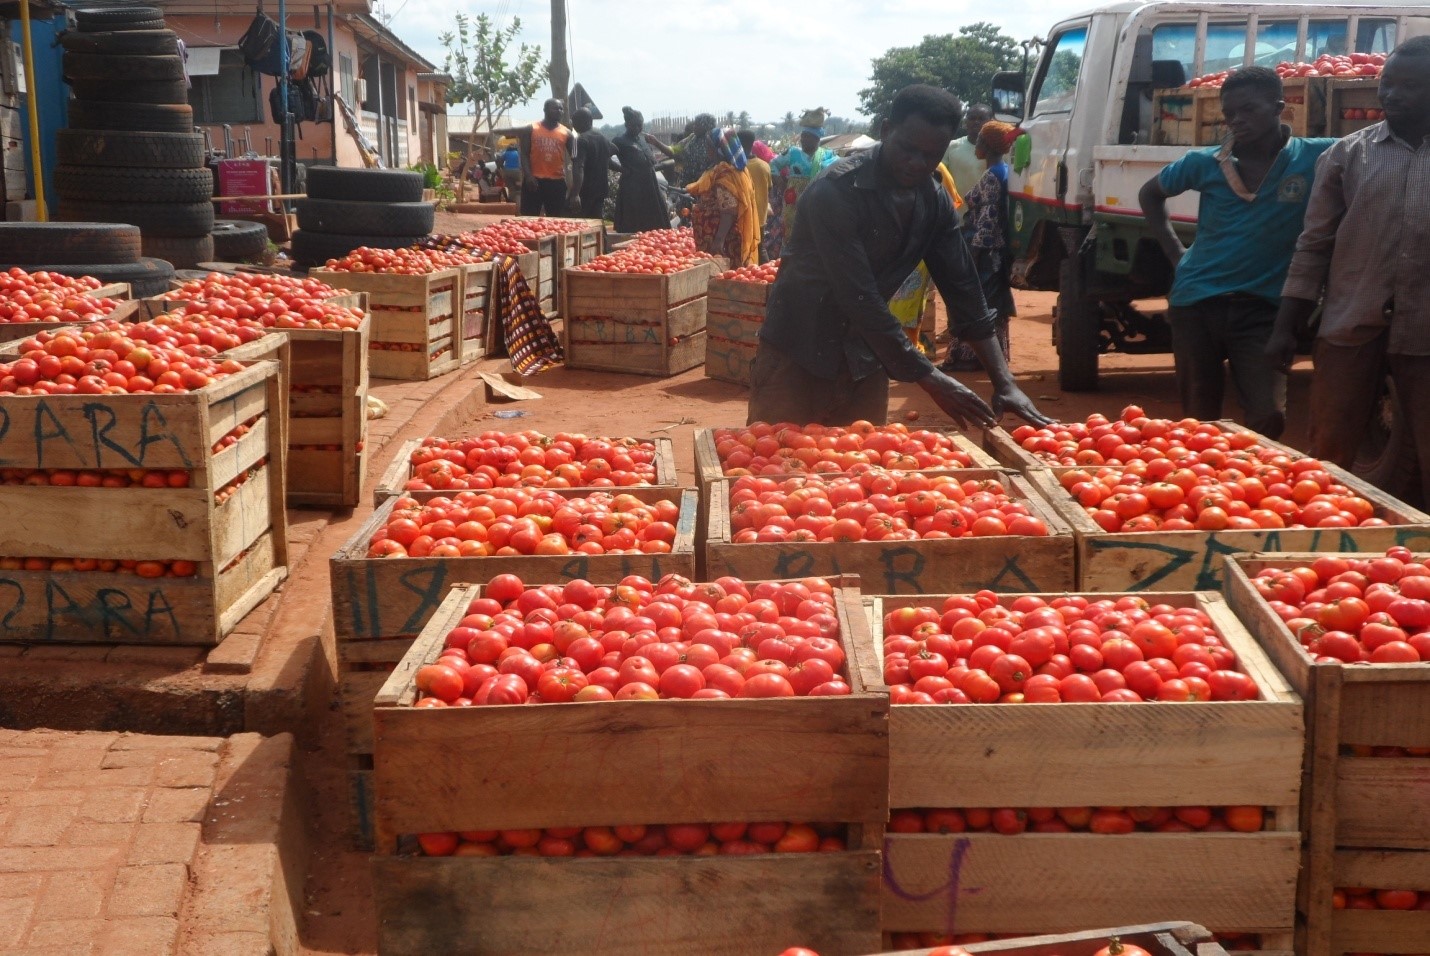 Tomato traders in Accra protest unfair crate reduction amidst soaring prices